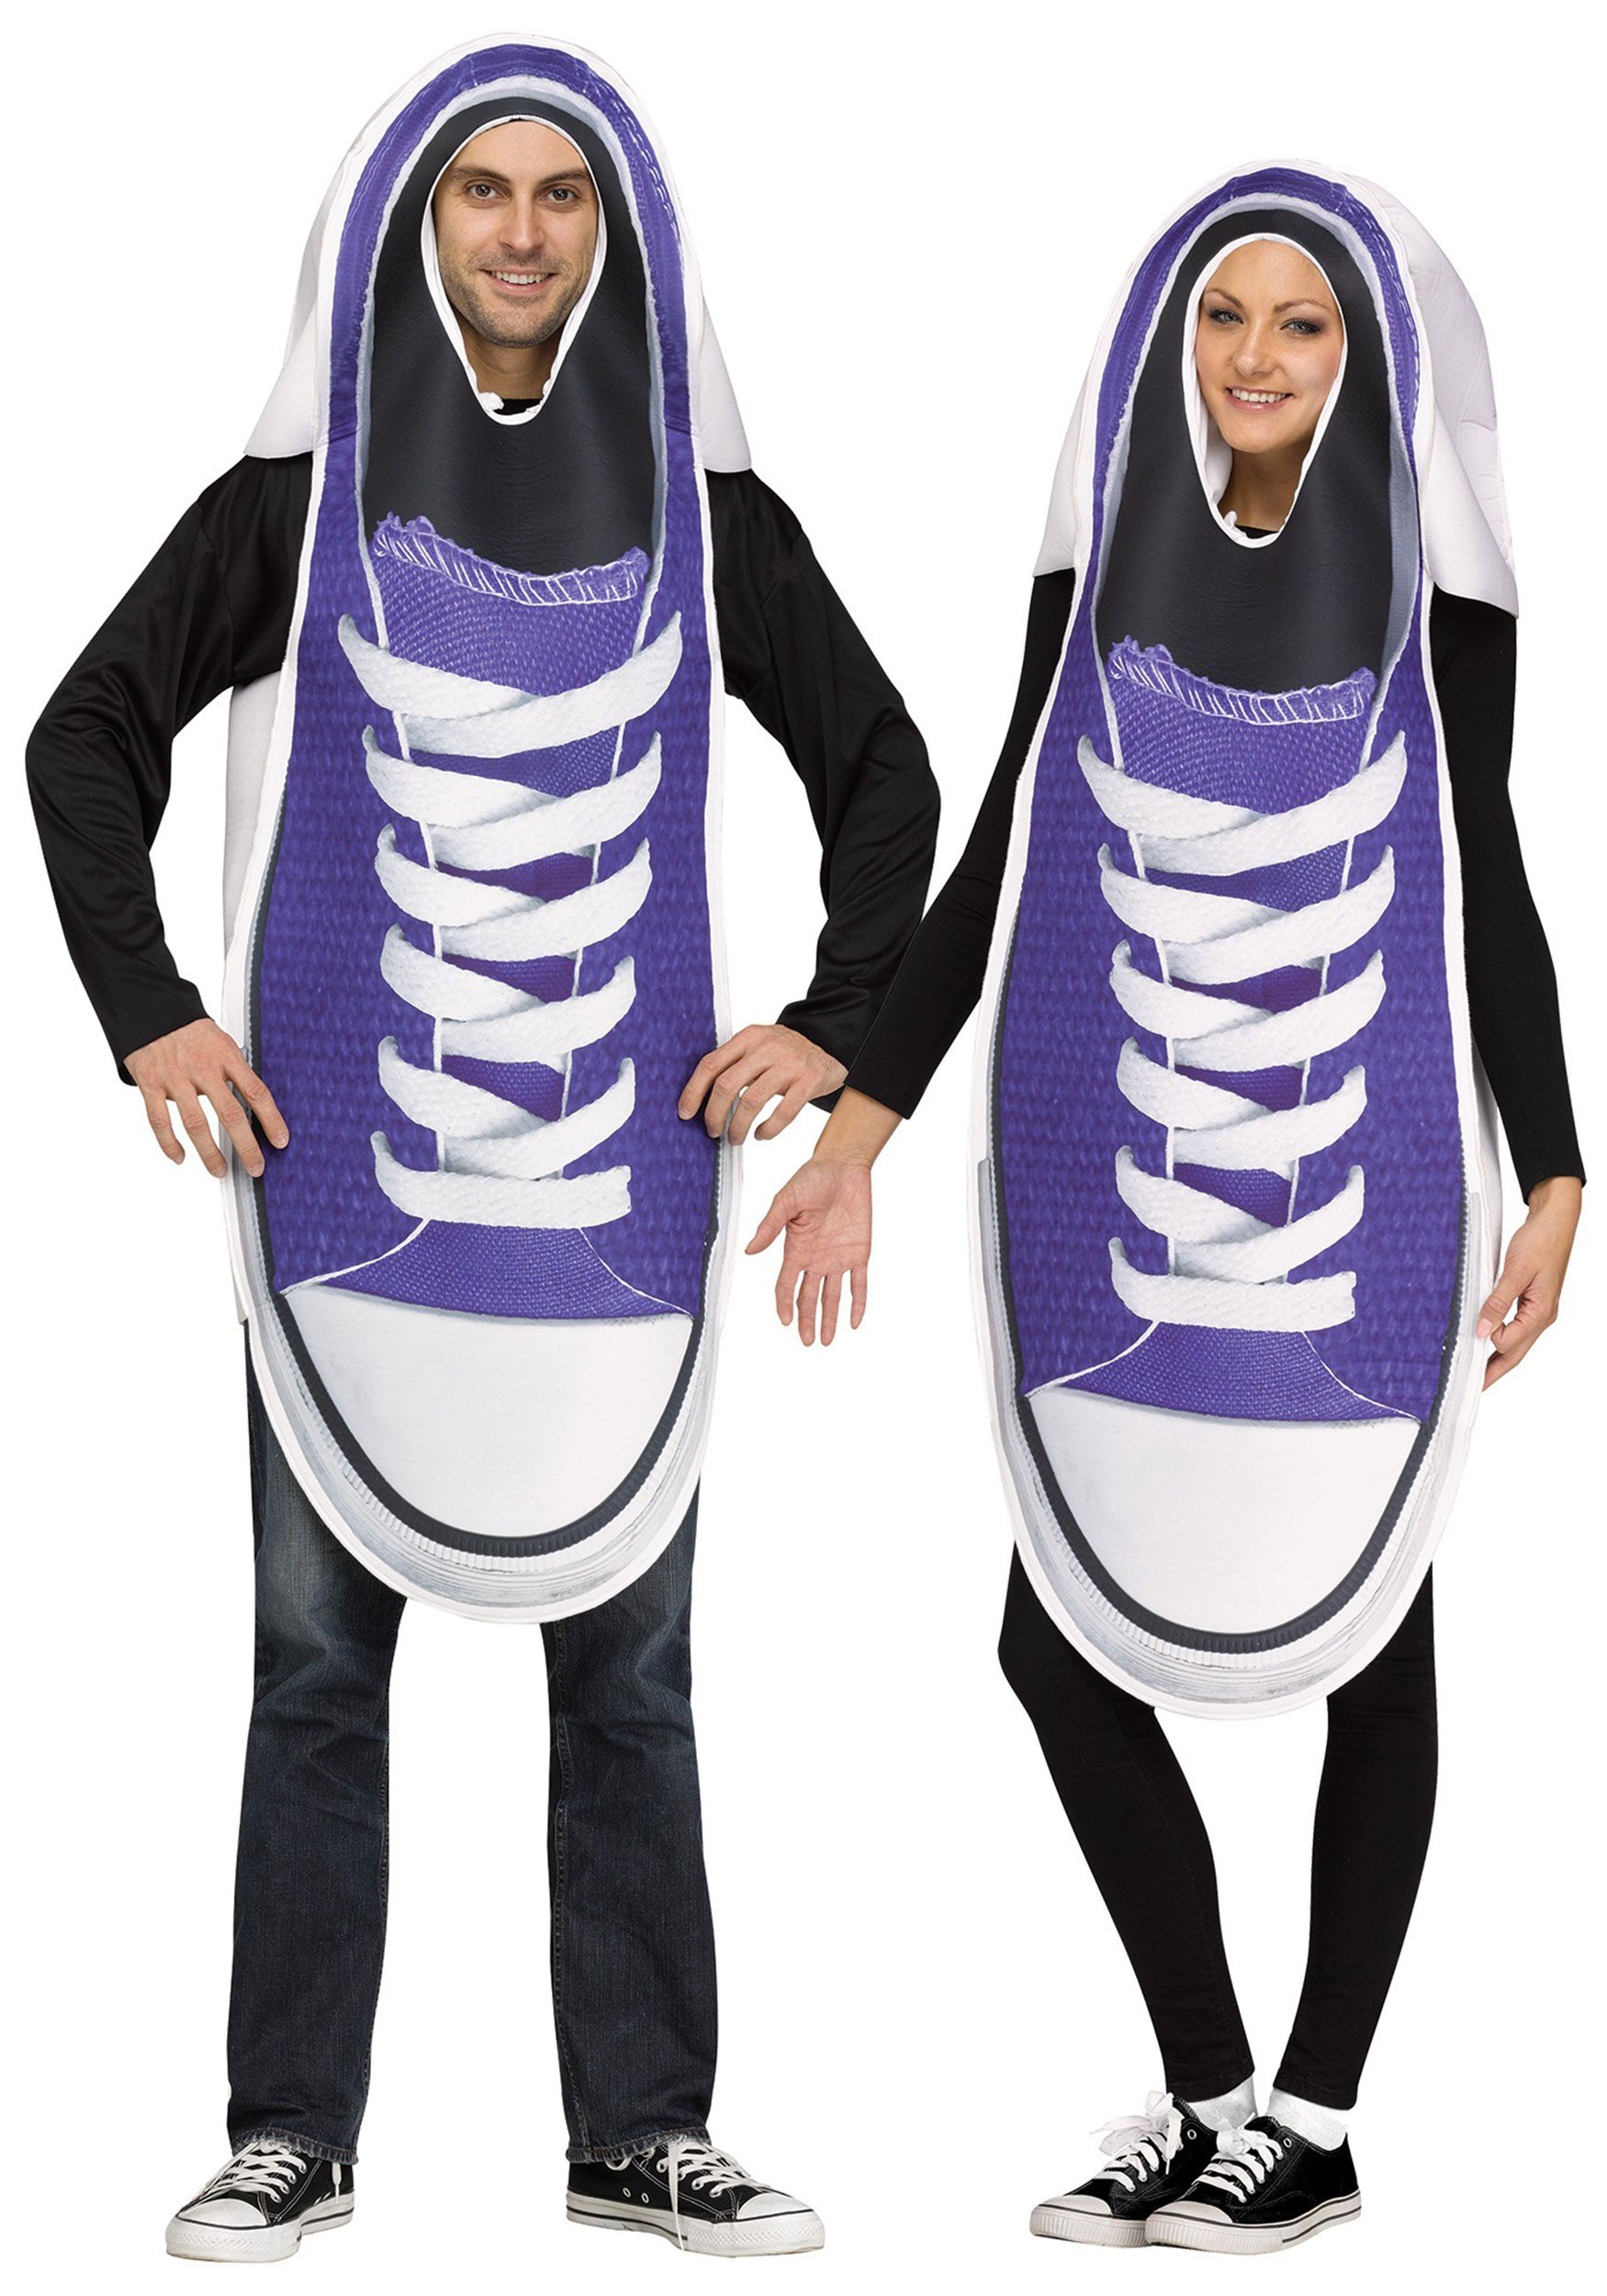 easy a costume shoes